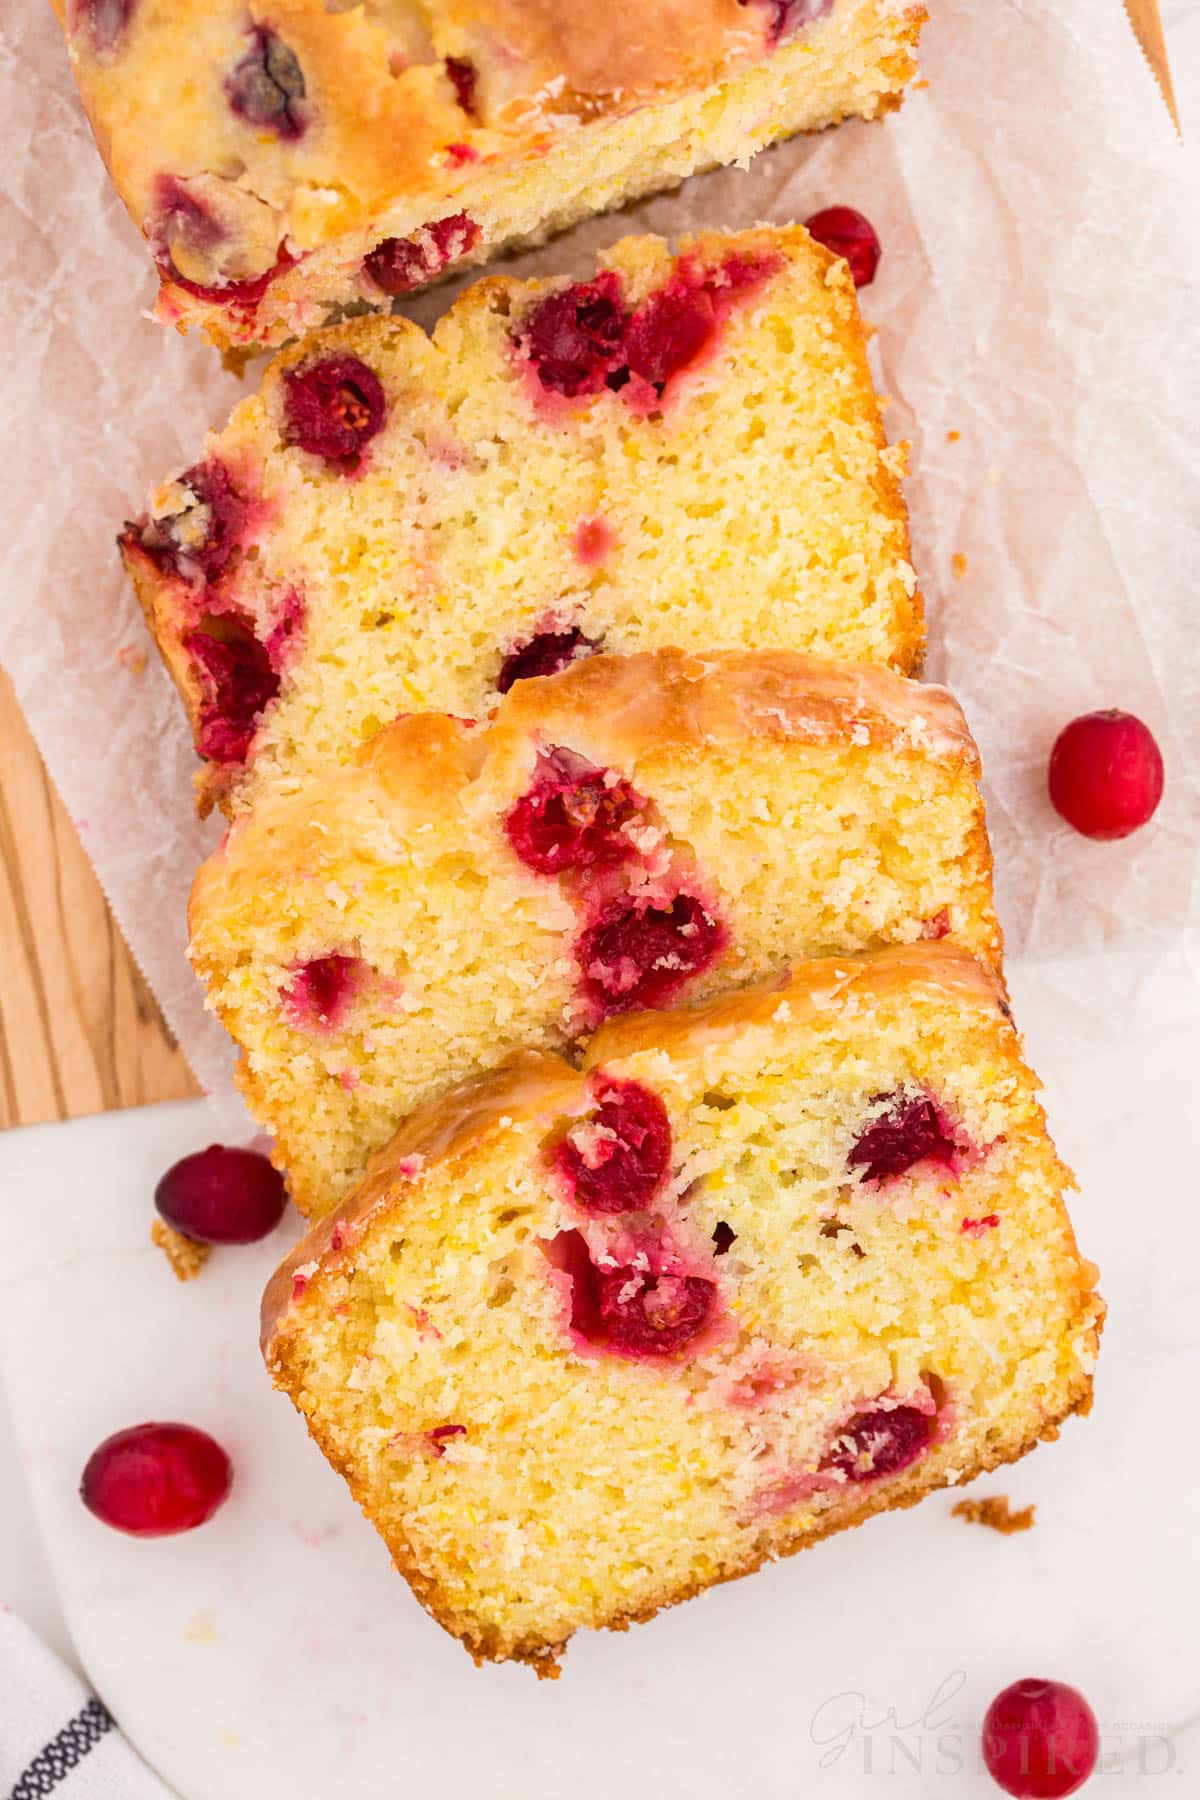 Sliced orange cranberry bread on parchment paper on a wooden kitchen board, checked linen, fresh whole cranberries on a white marble countertop.